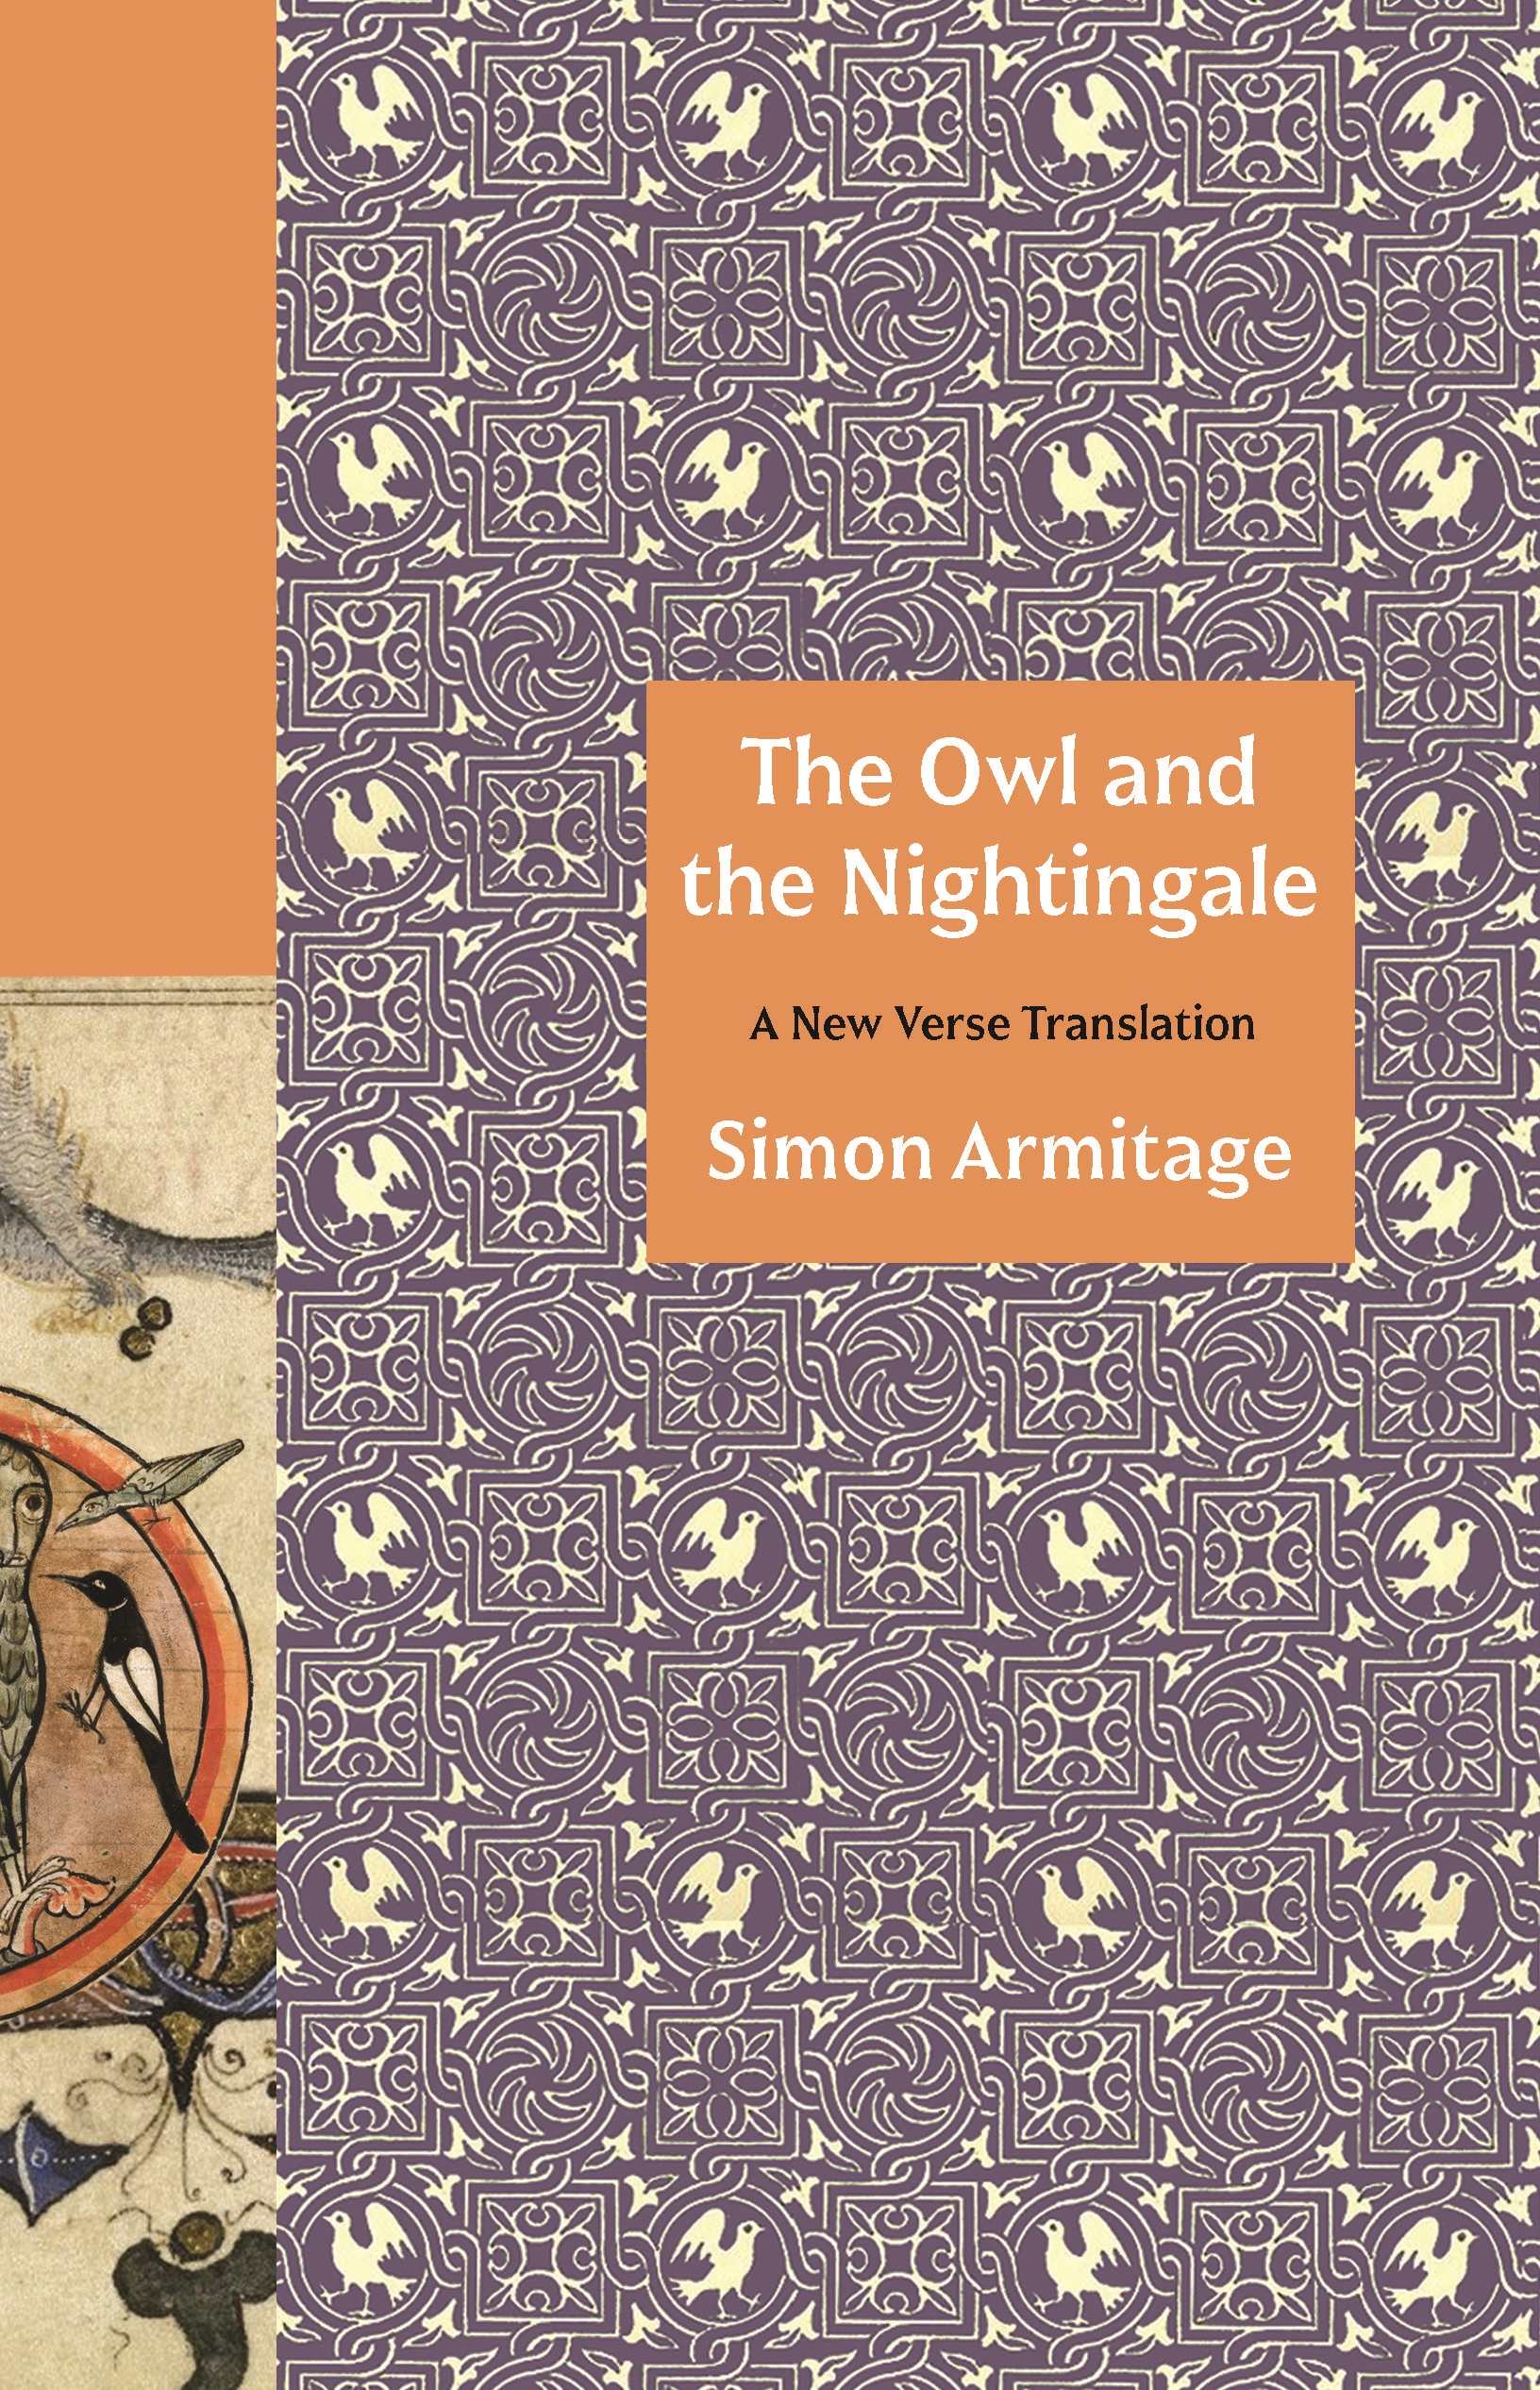 Book Cover Image of “The Owl and the Nightingale: A New Verse”